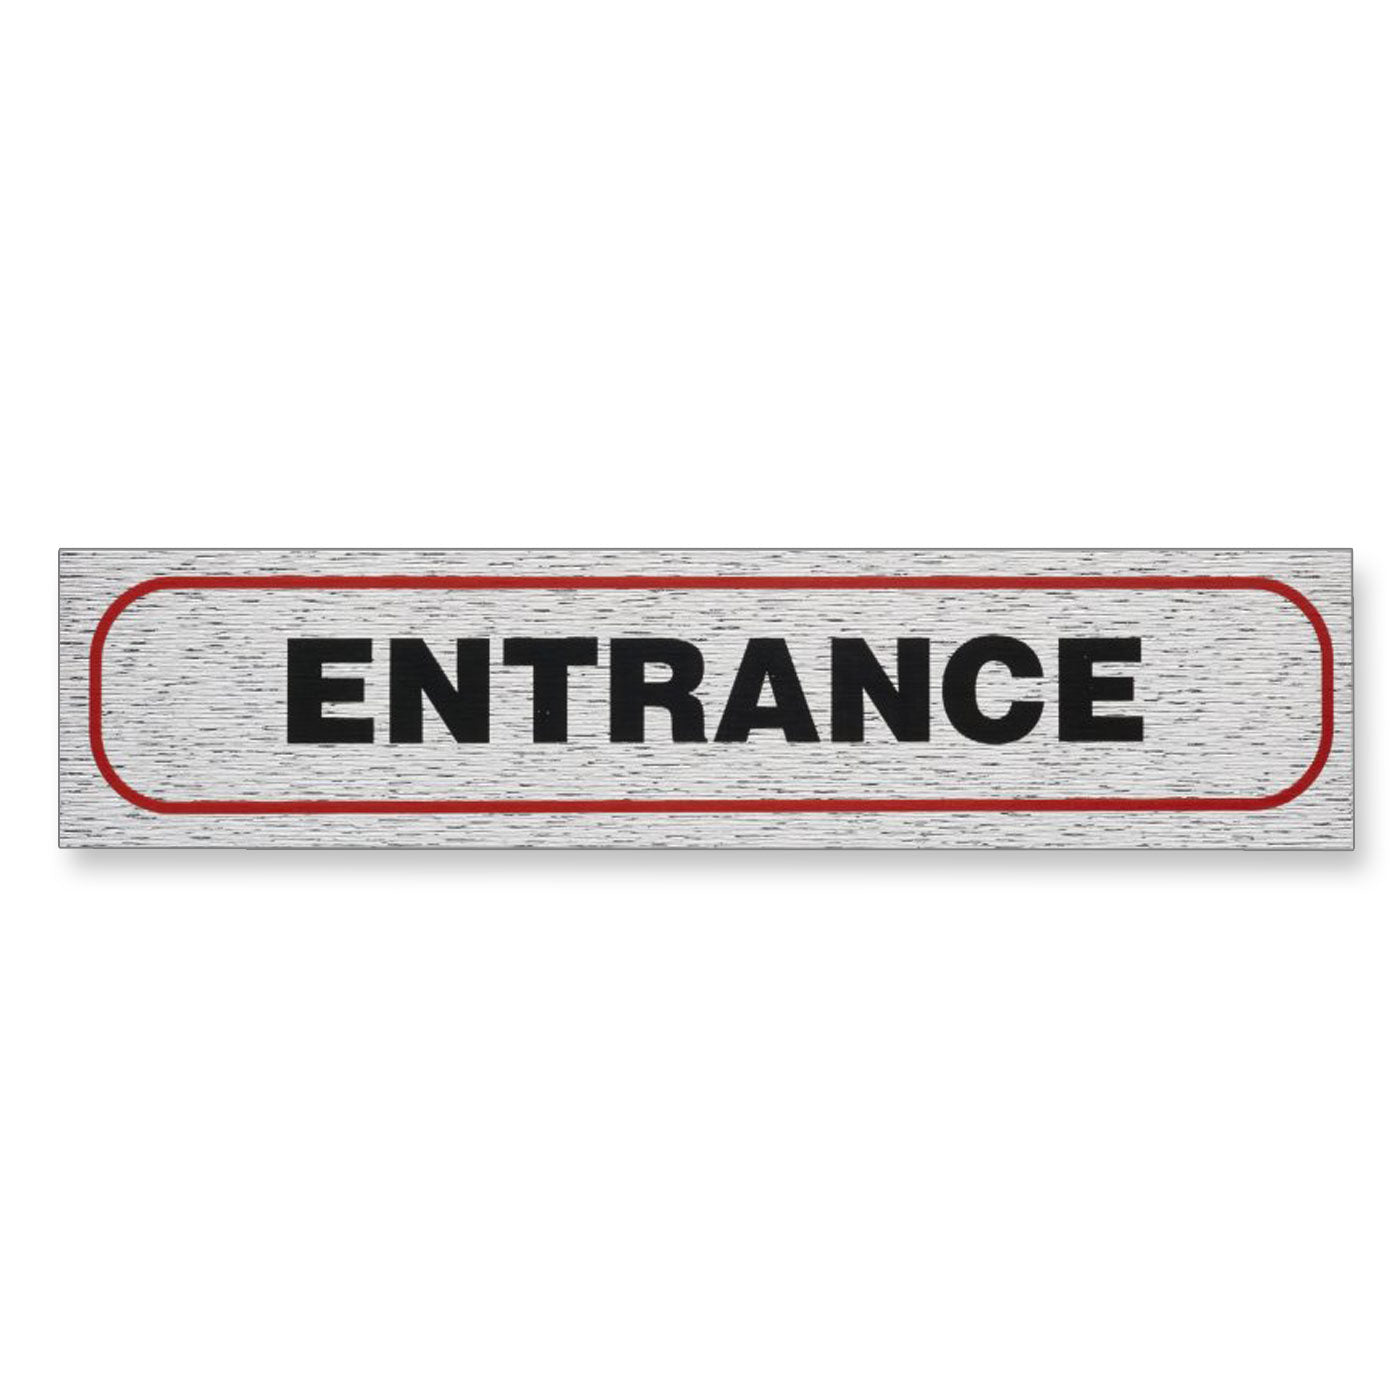 Information Sign "ENTRANCE" 17 x 4 cm [Self-Adhesive]